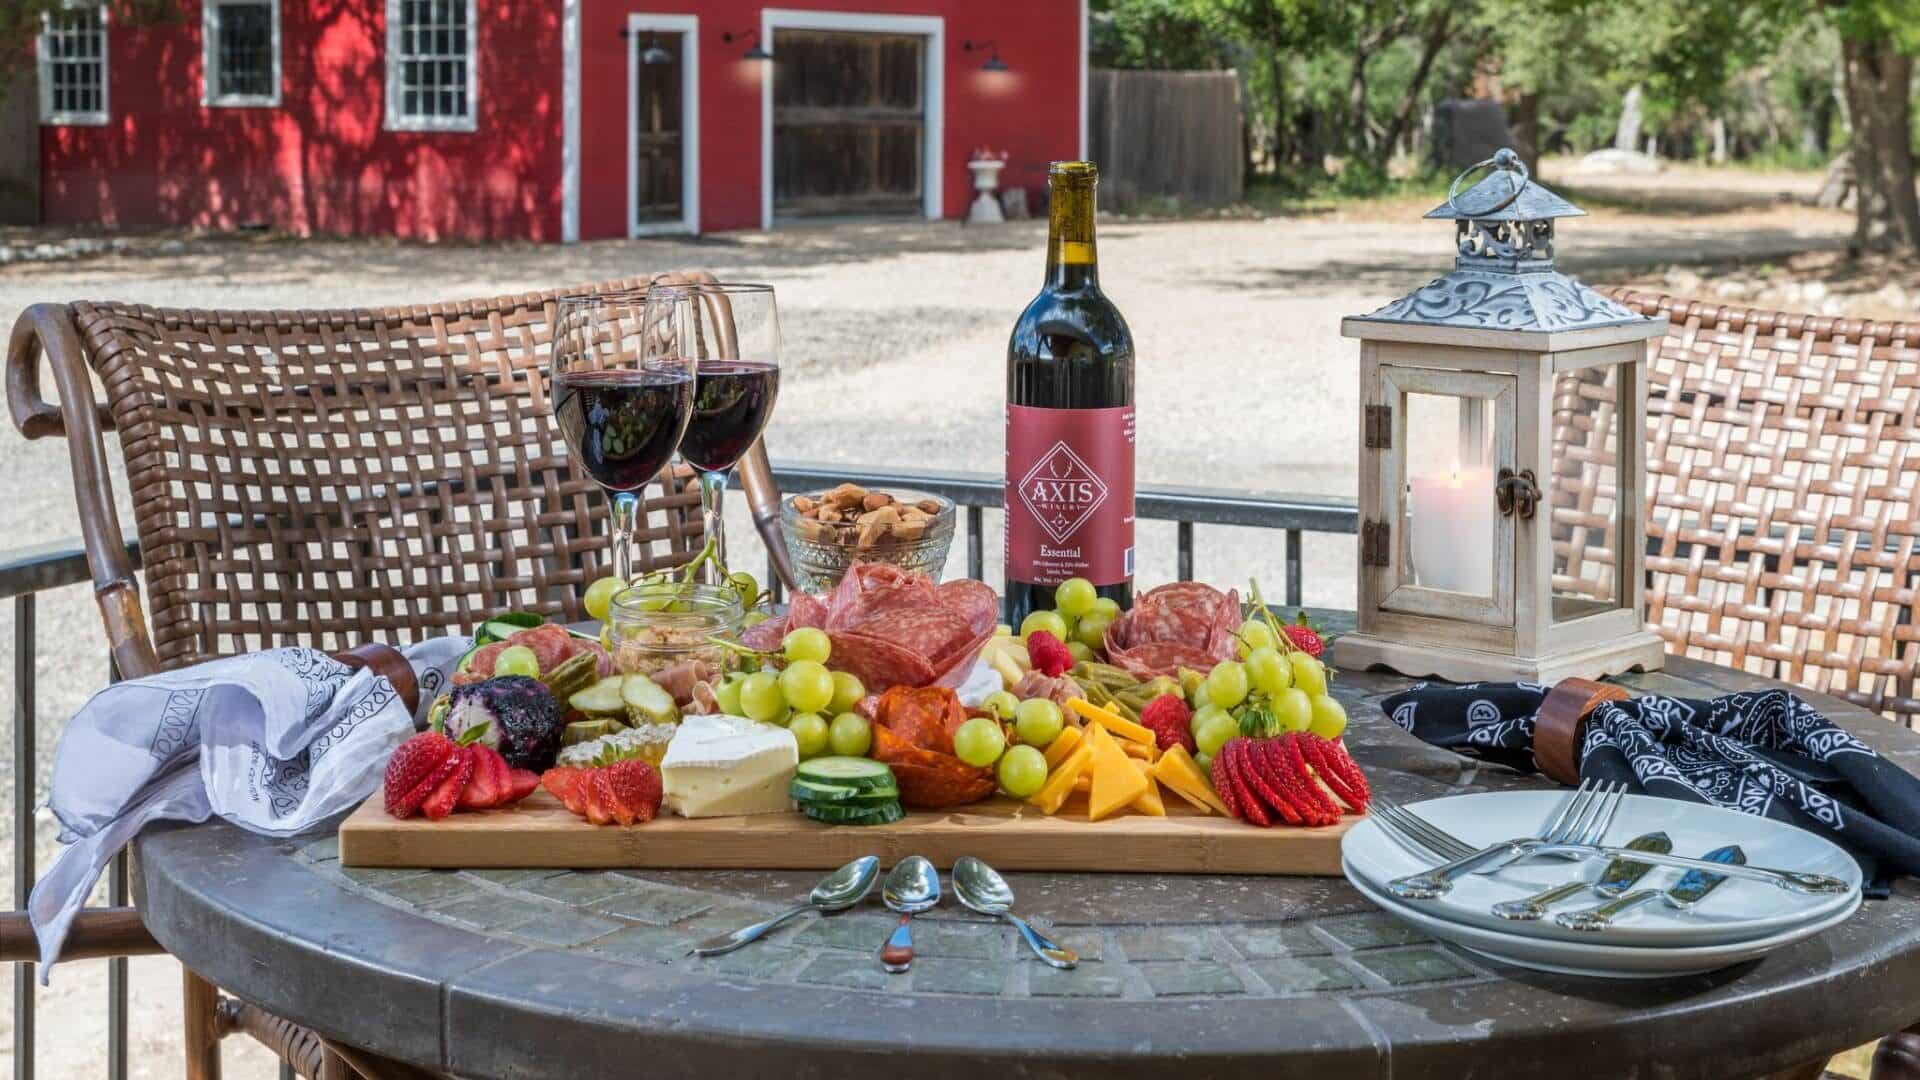 Fully loaded charcuterie board with meats, cheeses, fruits, and nuts and two glasses of red wine on a round table